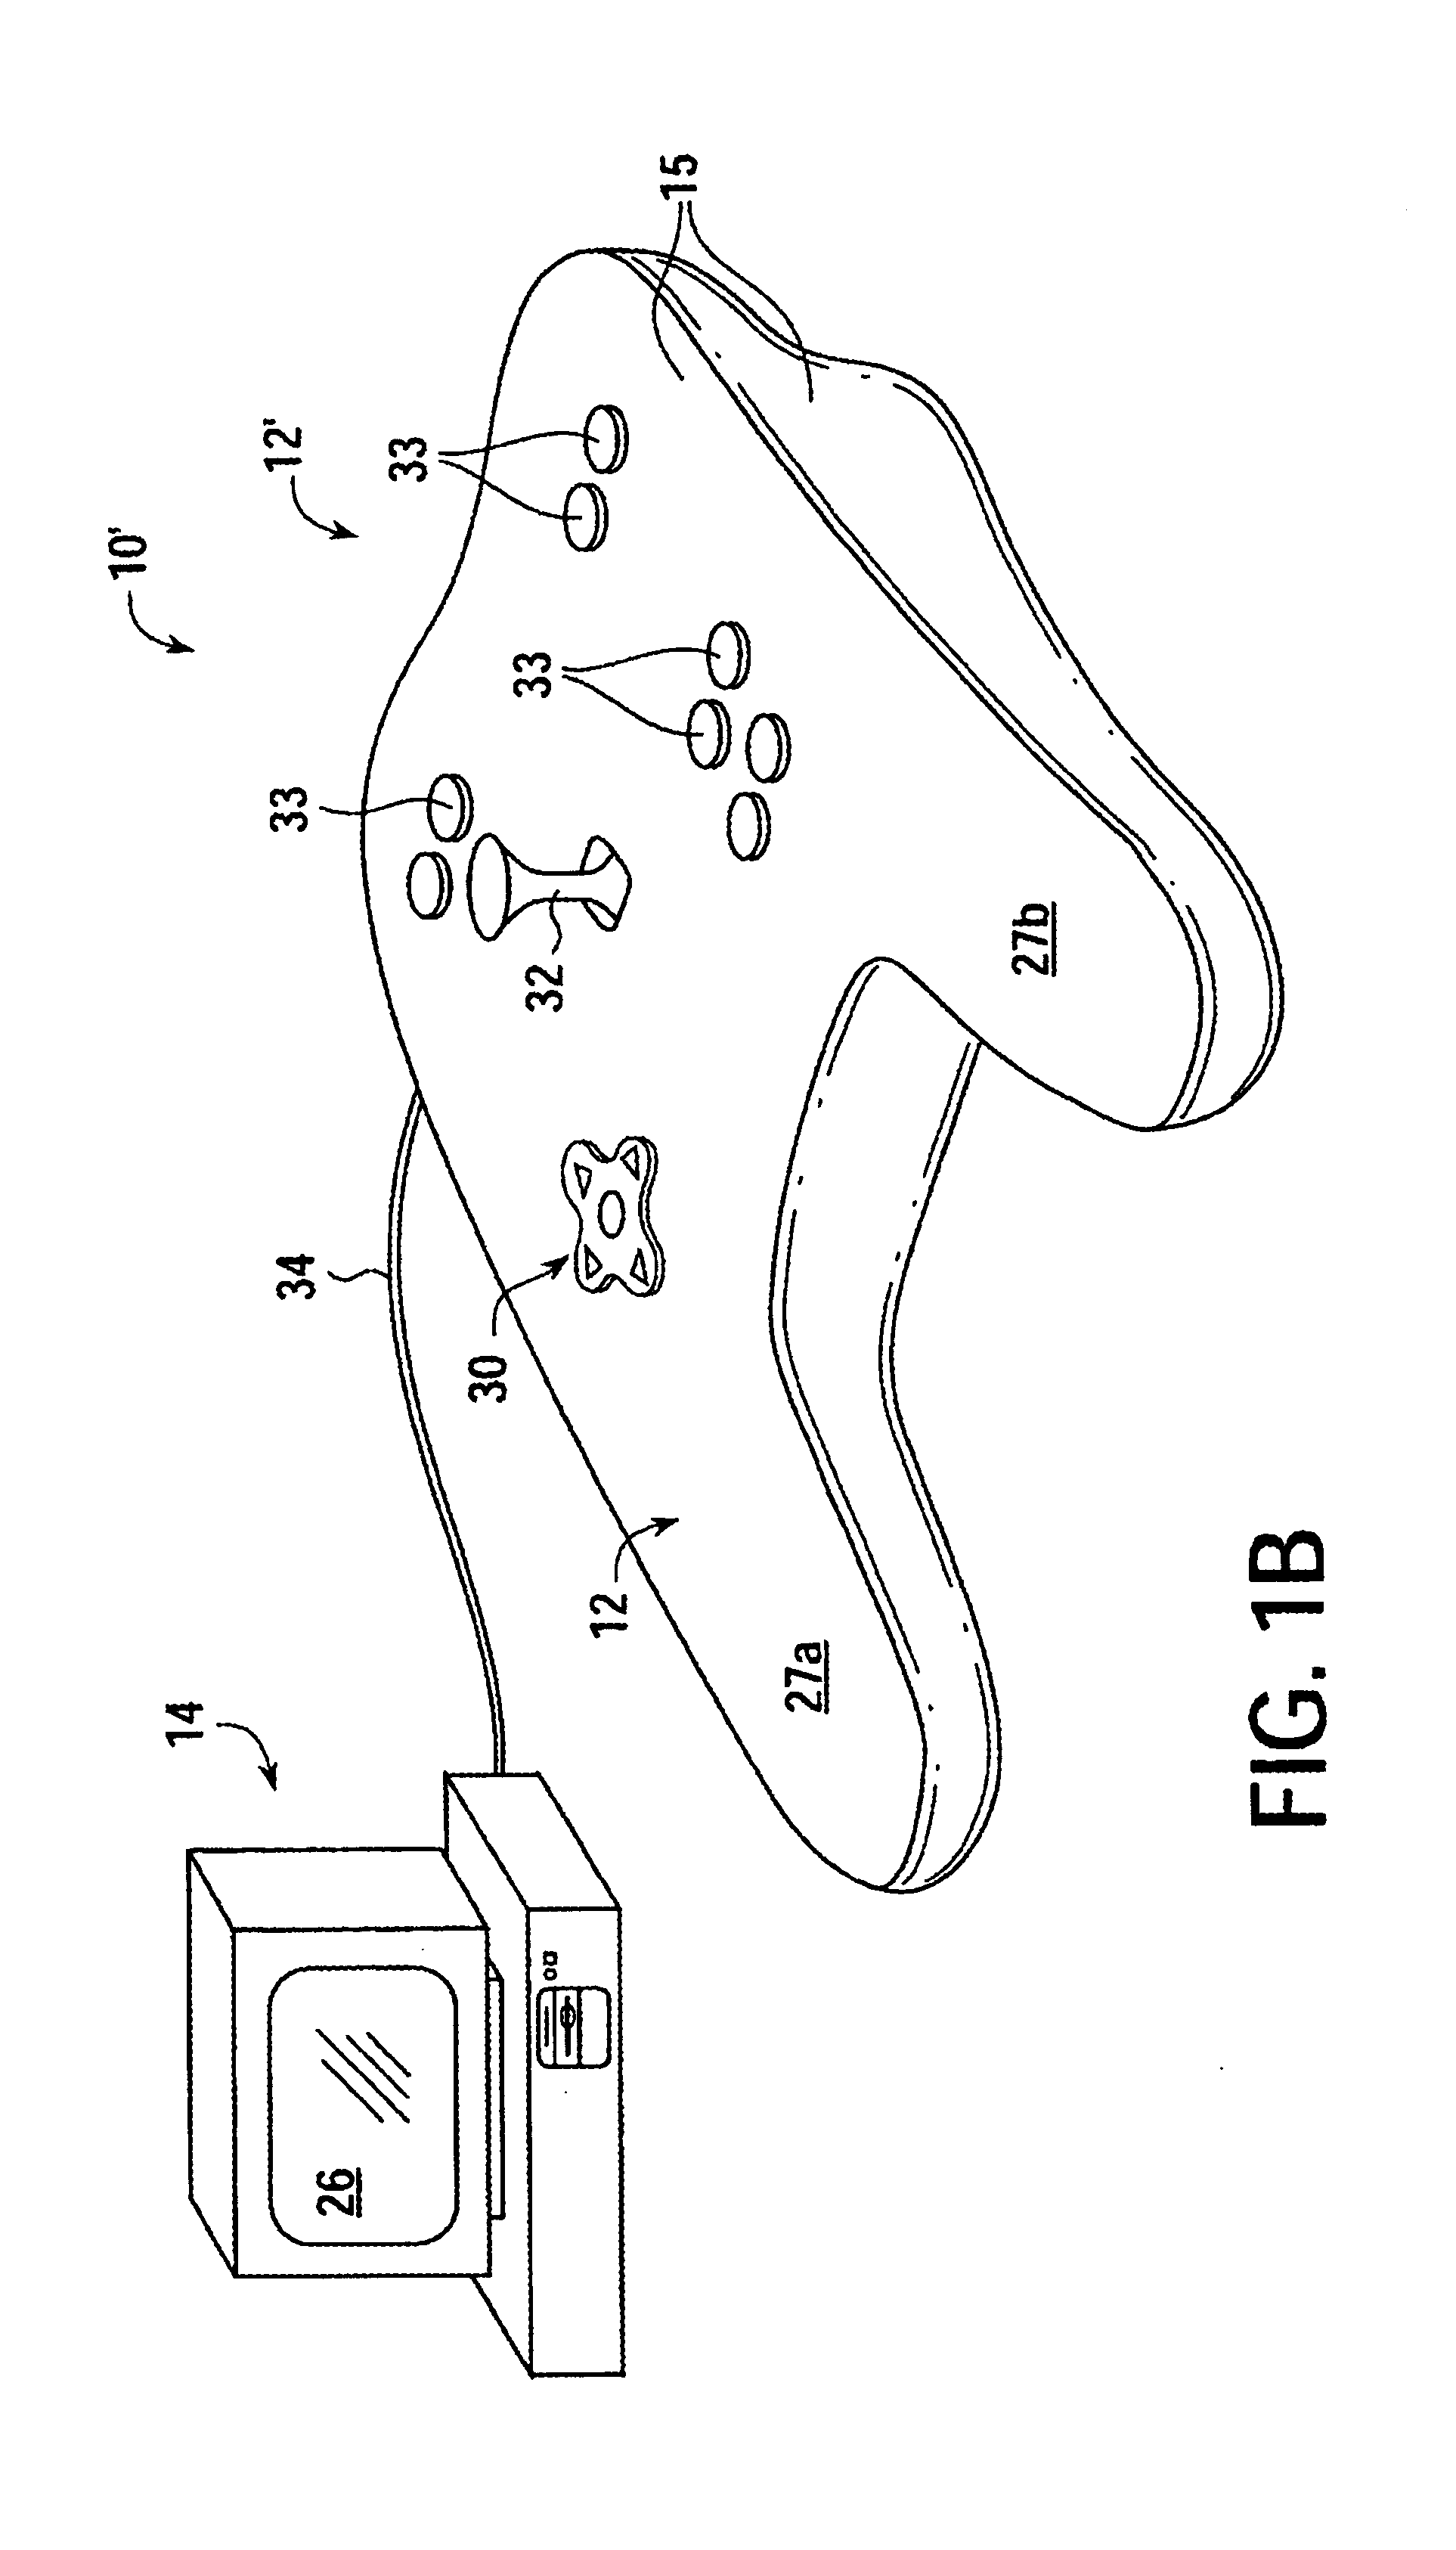 Actuator for providing tactile sensations and device for directional tactile sensations